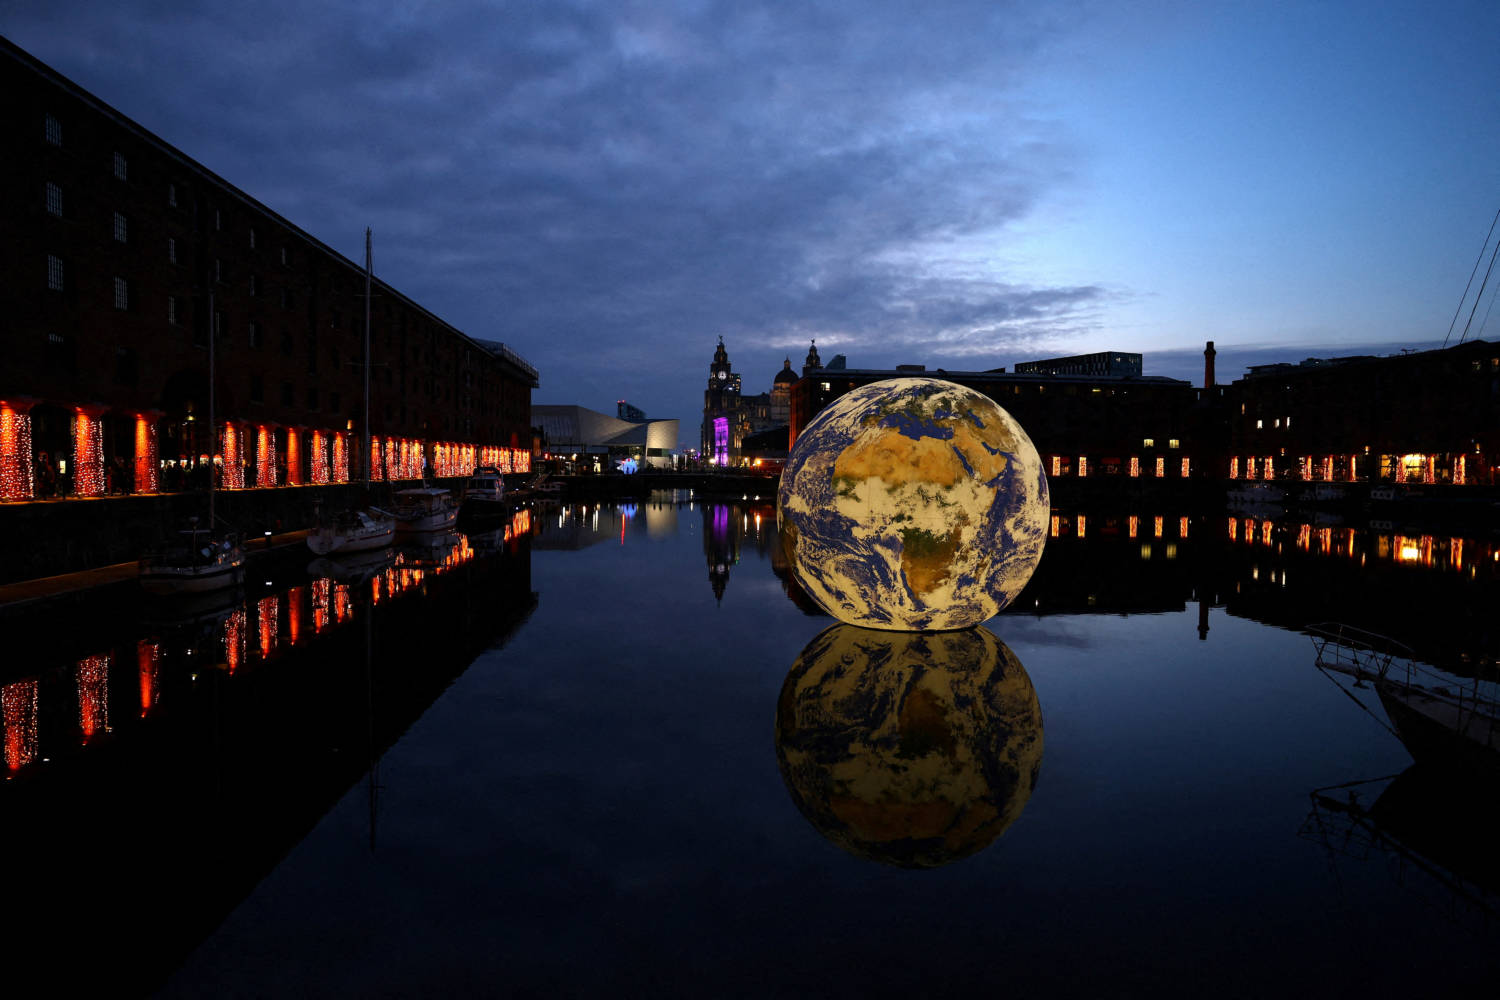 Luke Jerram's 'floating Earth', An Art Installation As Part Of The Eurovision Celebrations In The Albert Dock In Liverpool